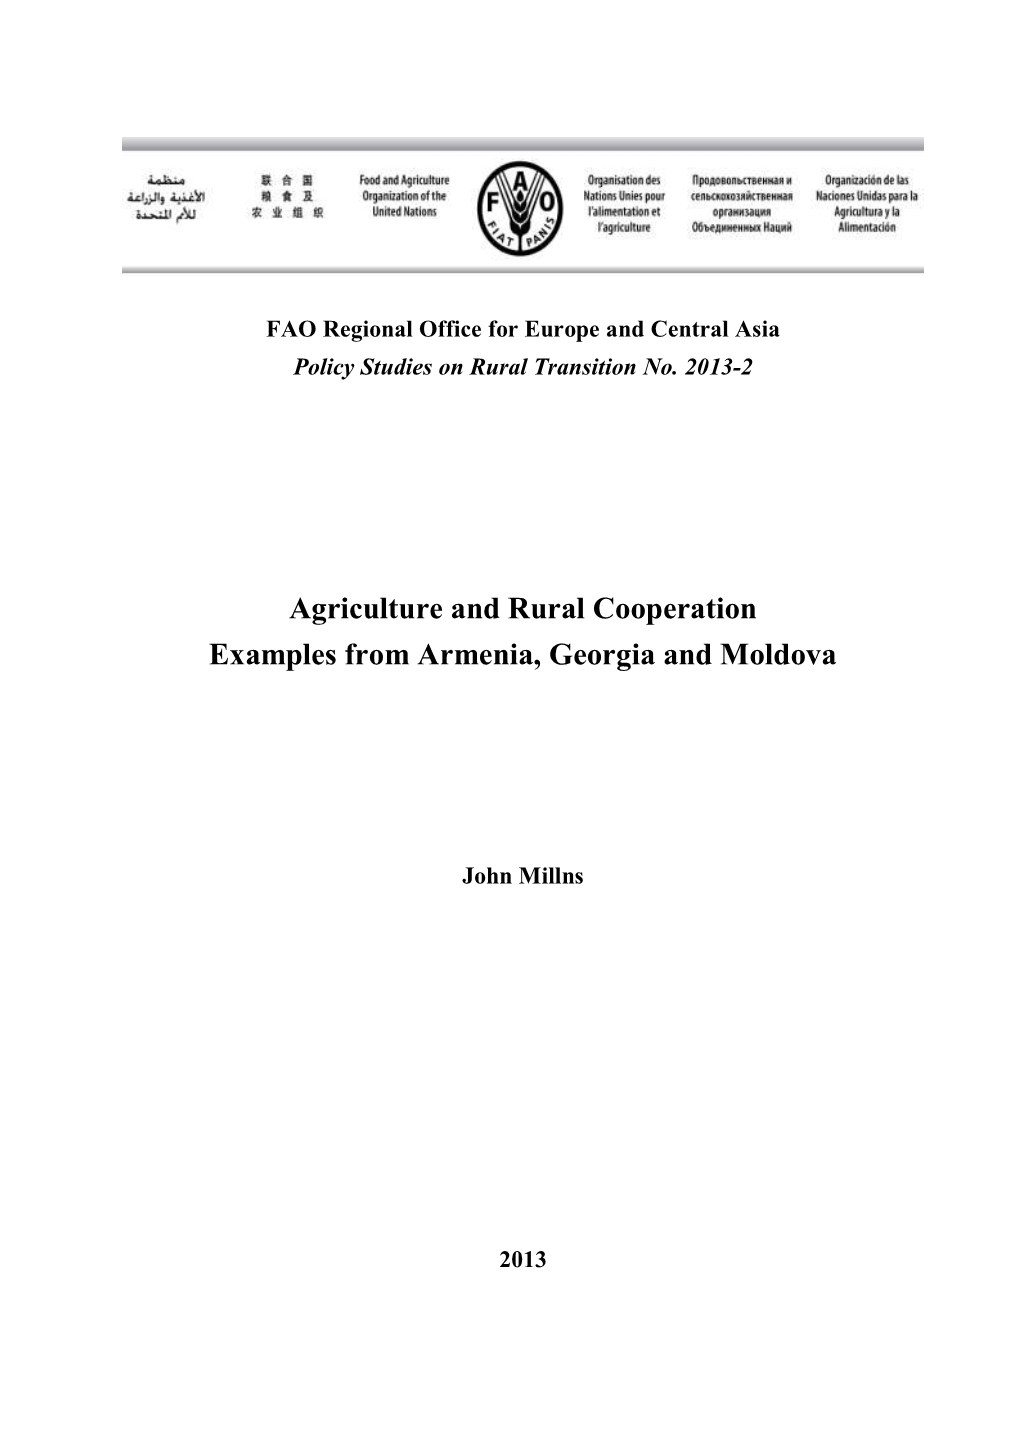 Agriculture and Rural Cooperation Examples from Armenia, Georgia and Moldova